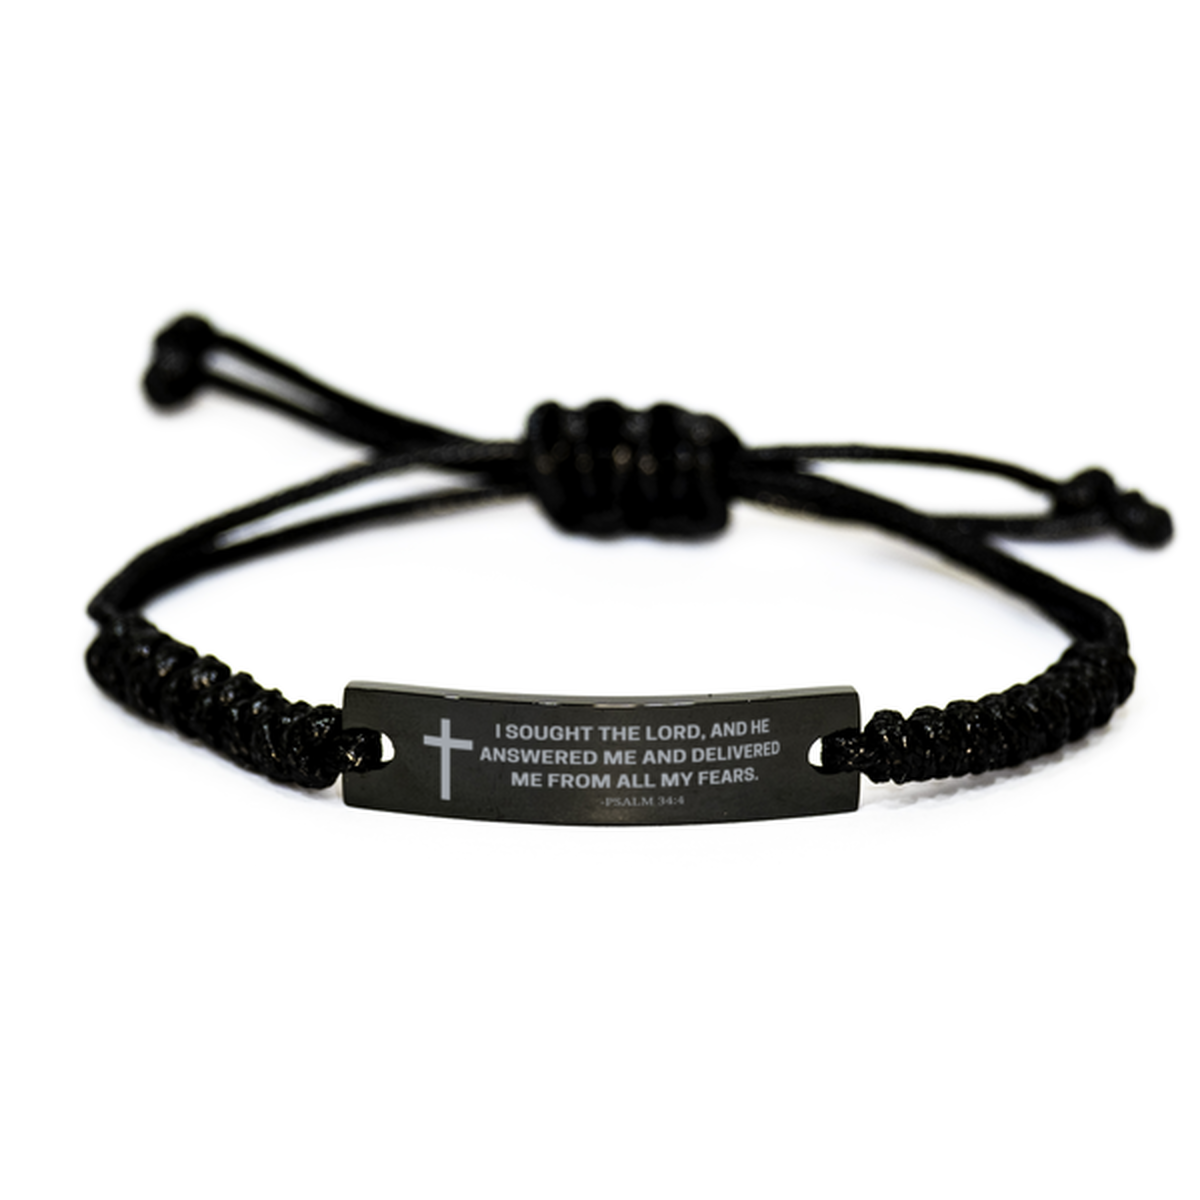 Baptism Gifts For Teenage Boys Girls, Christian Bible Verse Black Rope Bracelet, I sought the Lord, Catholic Confirmation Gifts for Son, Godson, Grandson, Nephew